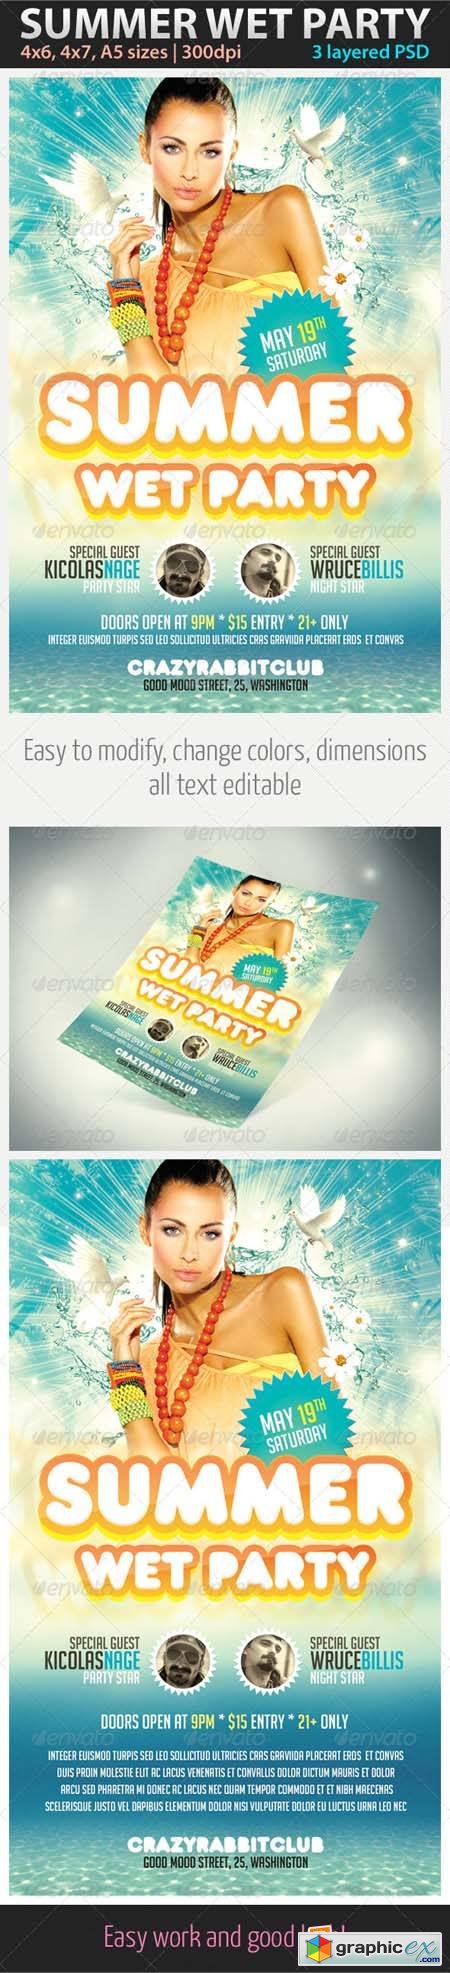 Summer Wet Party Flyer Template Photoshop